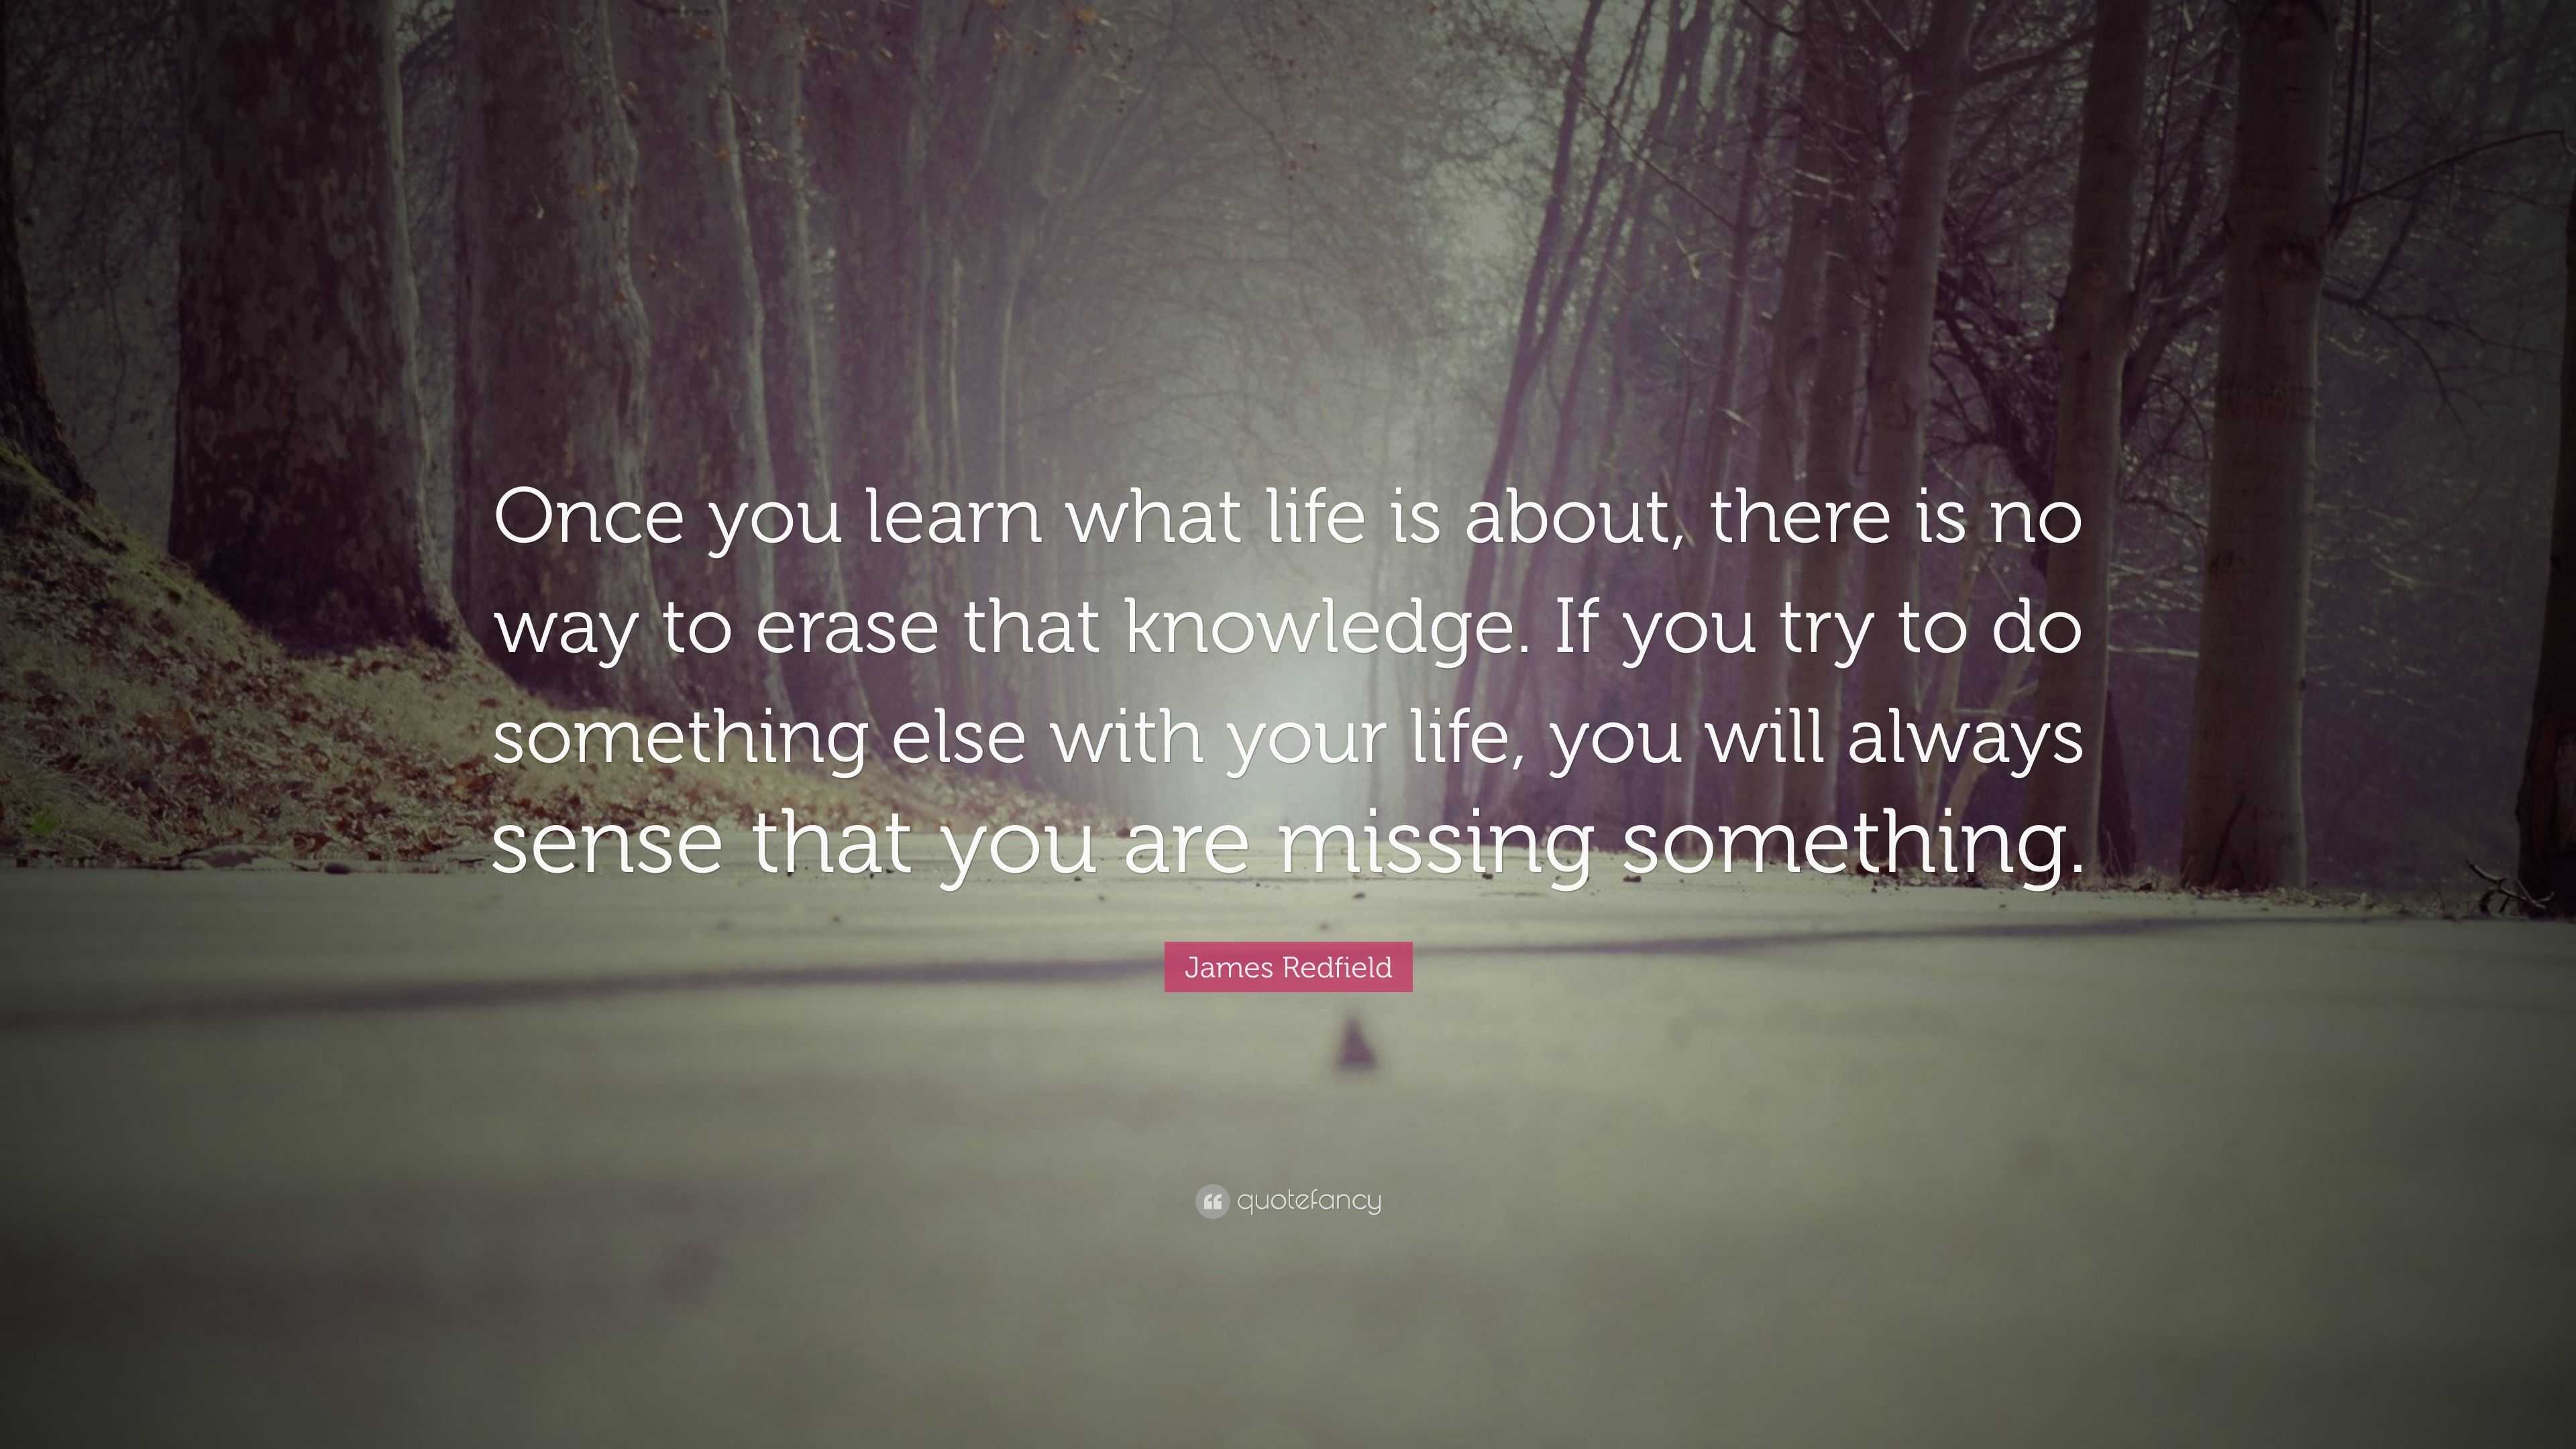 James Redfield Quote: “Once you learn what life is about, there is no ...